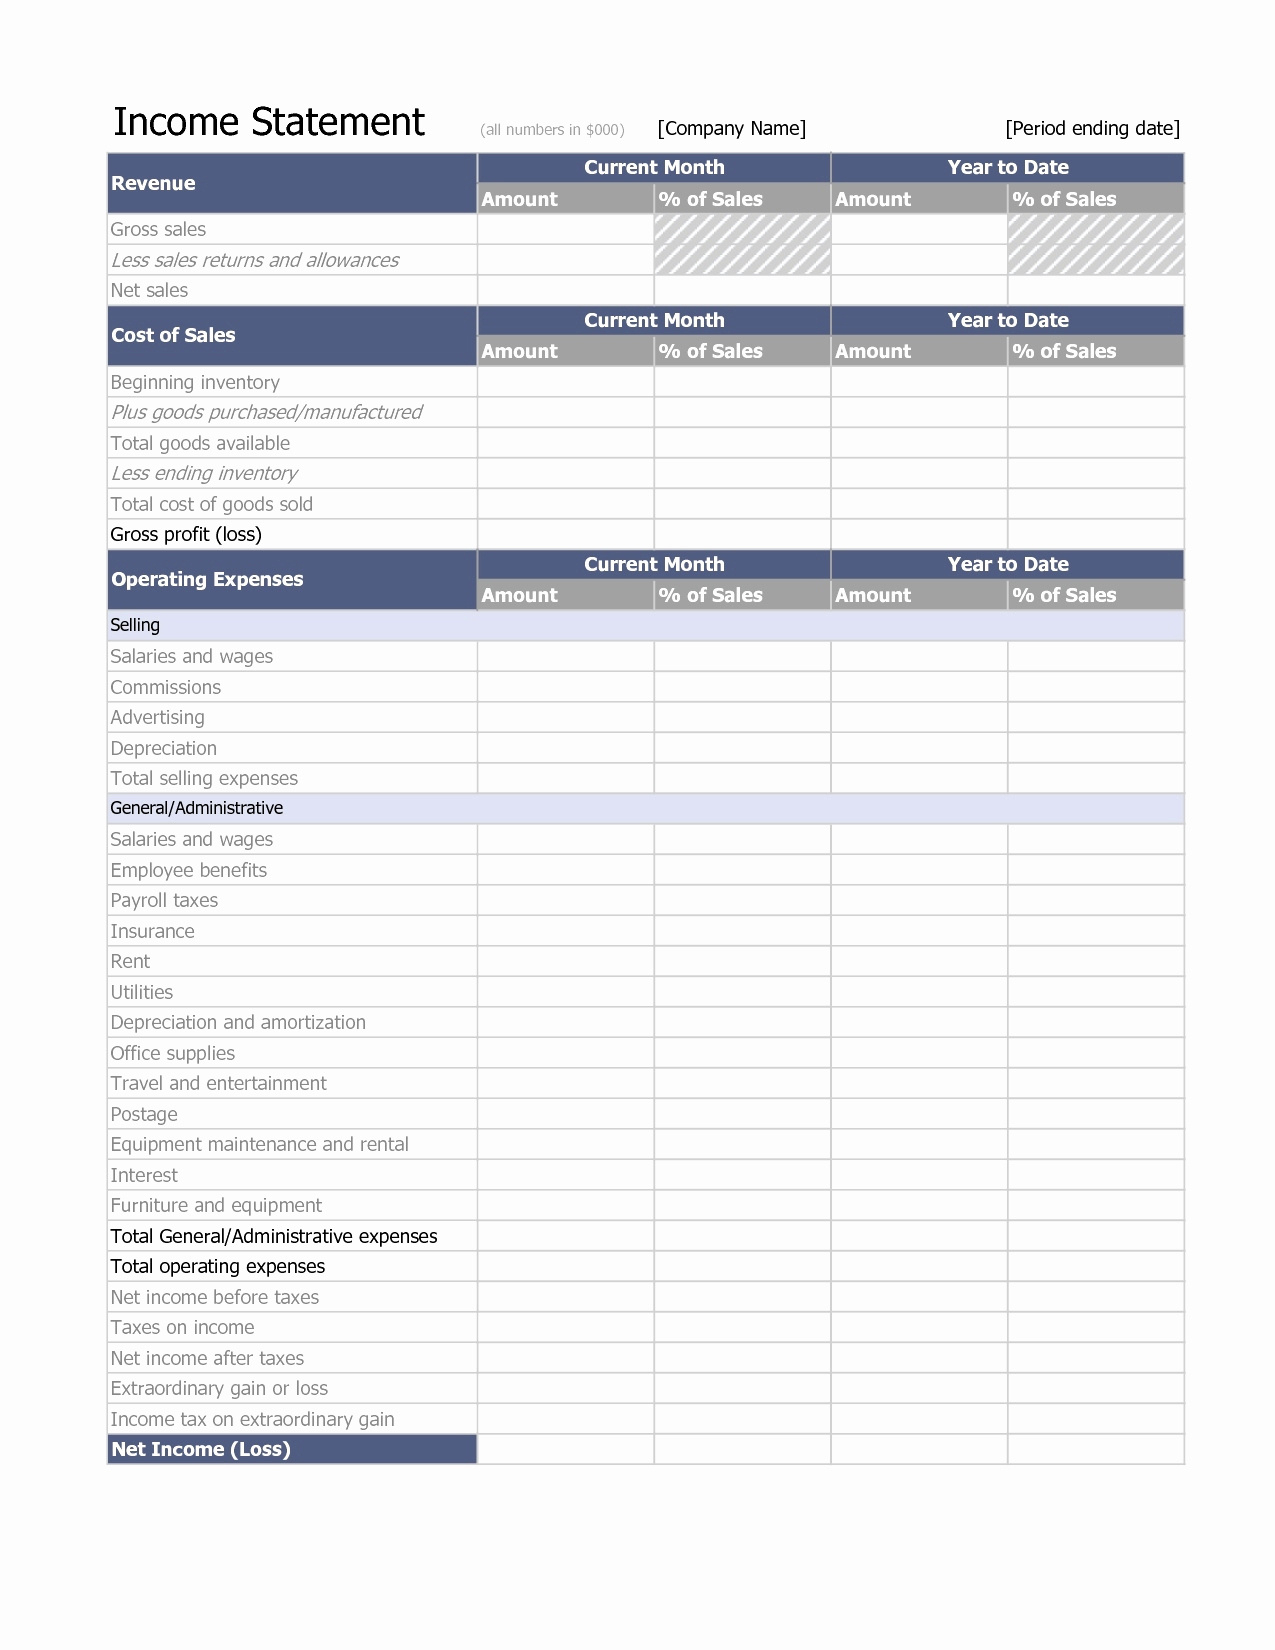 tax-deduction-spreadsheet-template-excel-spreadsheet-downloa-tax-deduction-spreadsheet-template